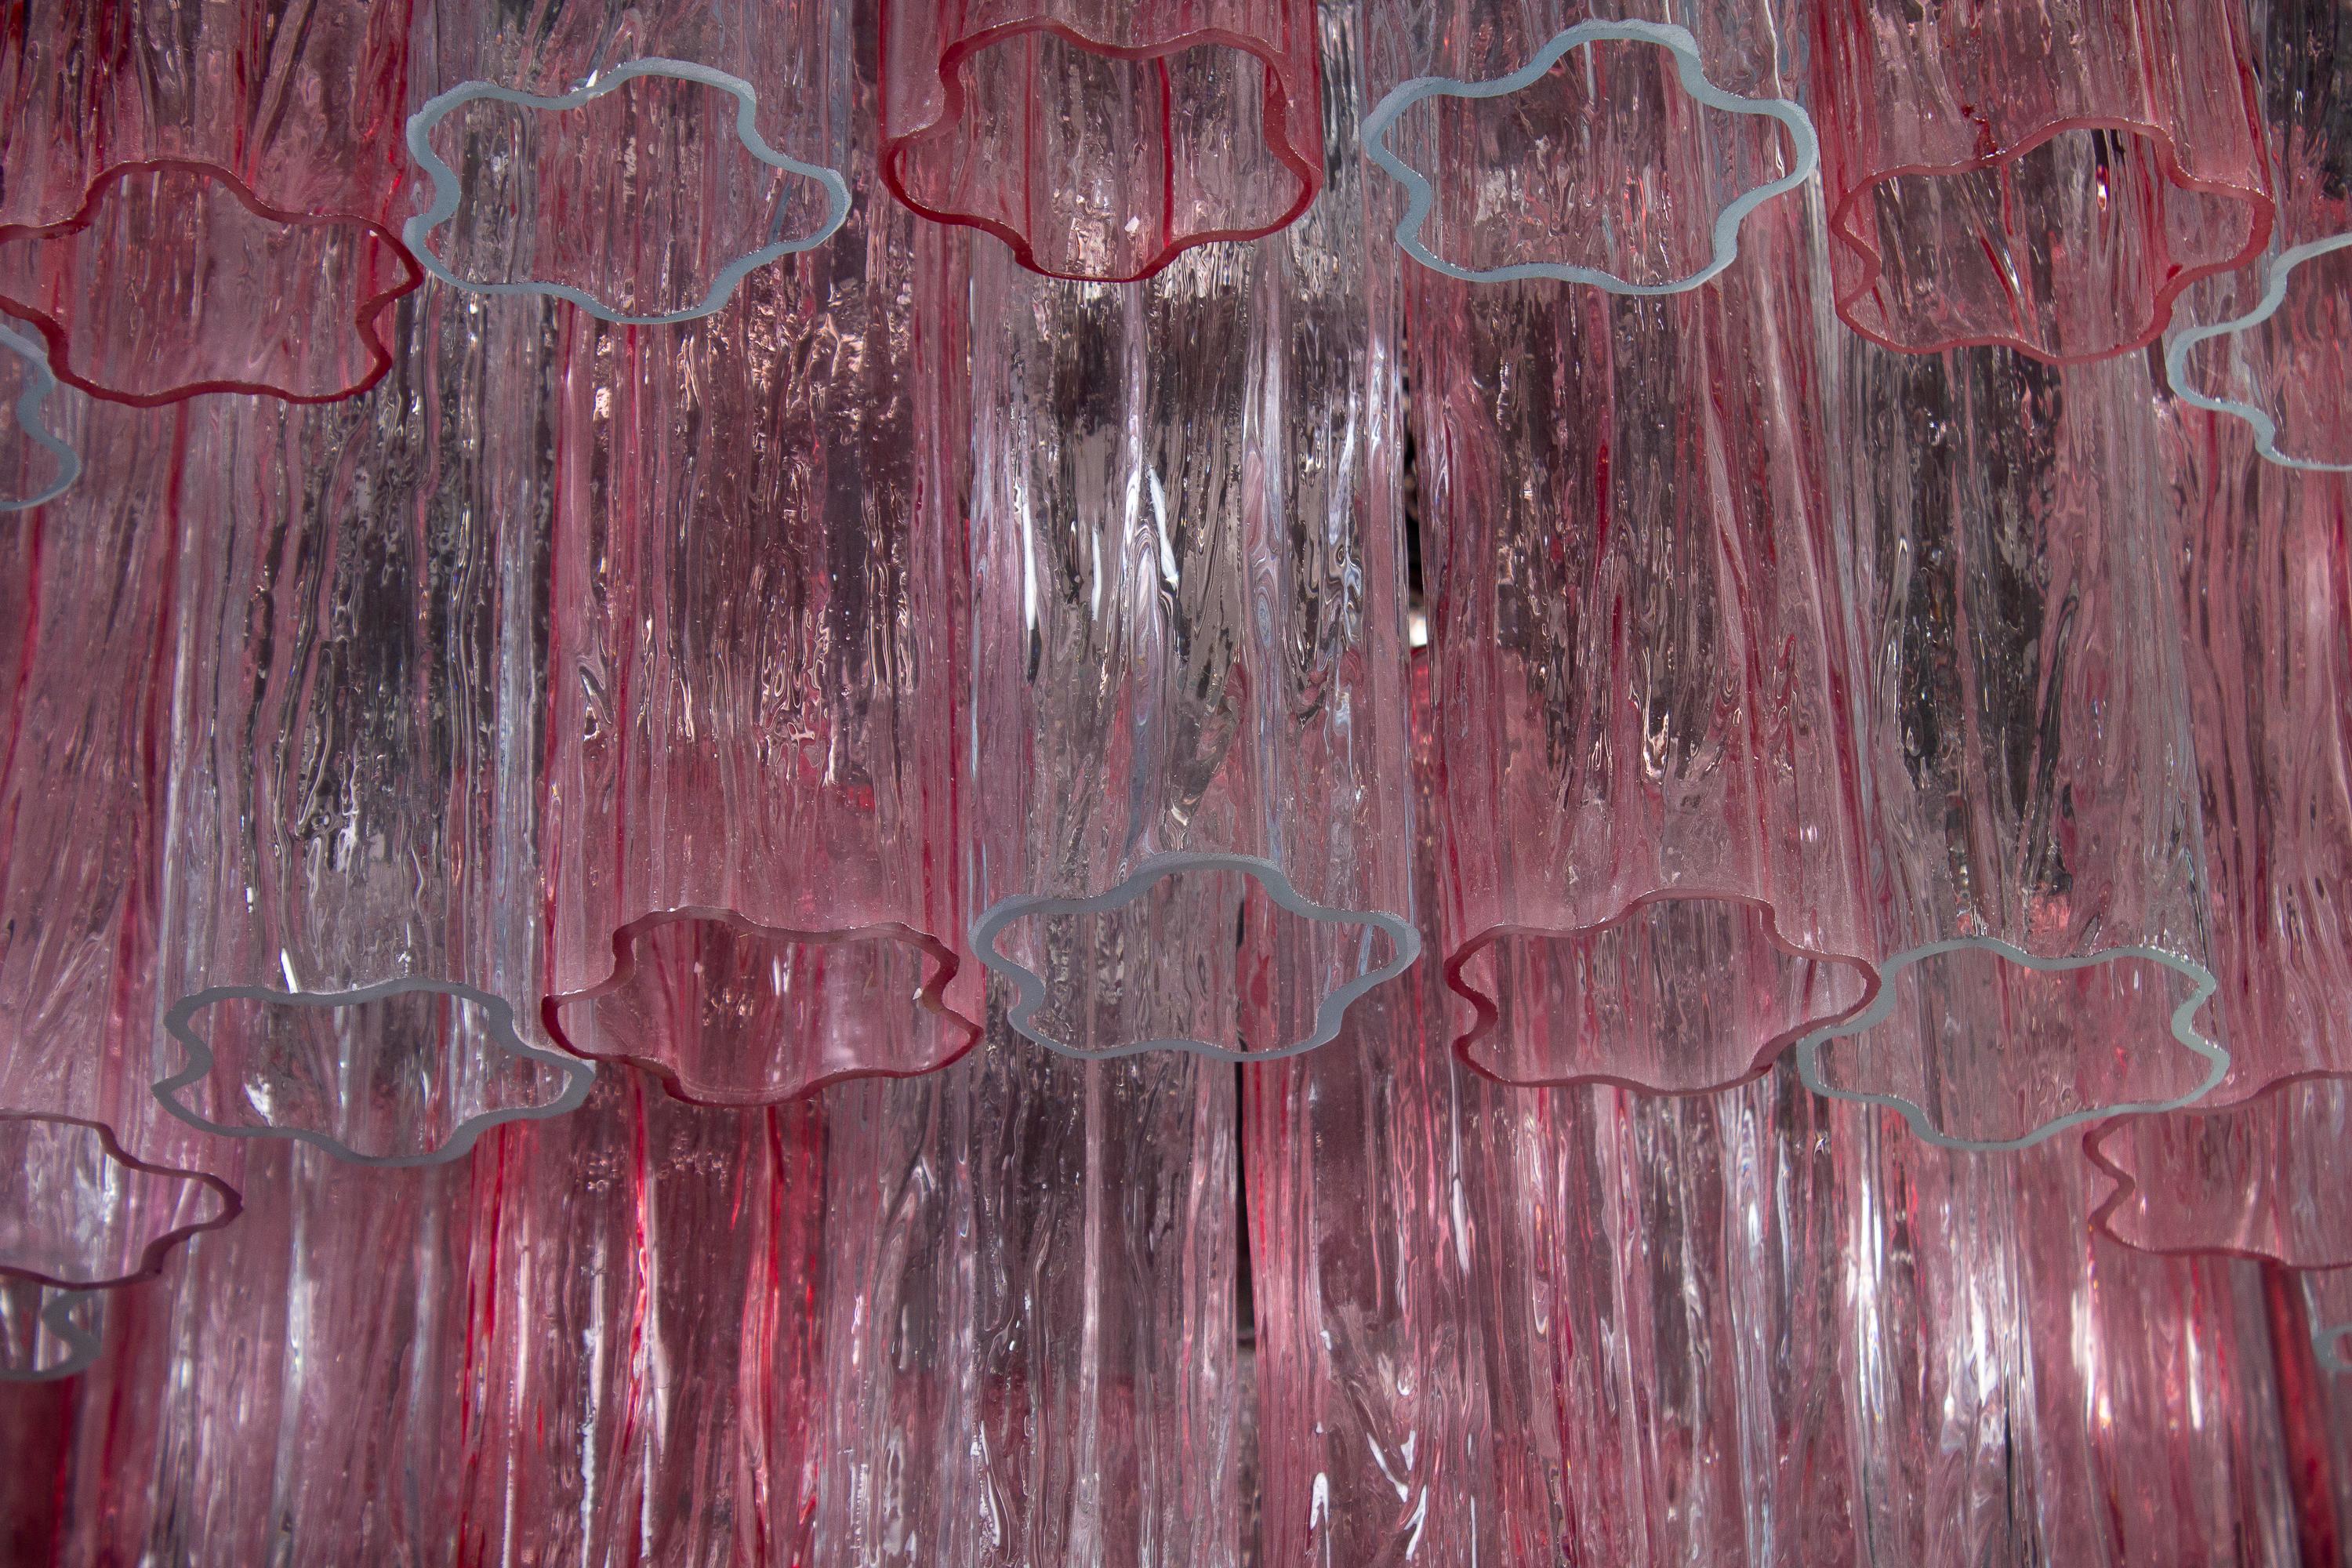 Pink and Ice Color Large Italian Murano Glass Tronchi Chandelier For Sale 6